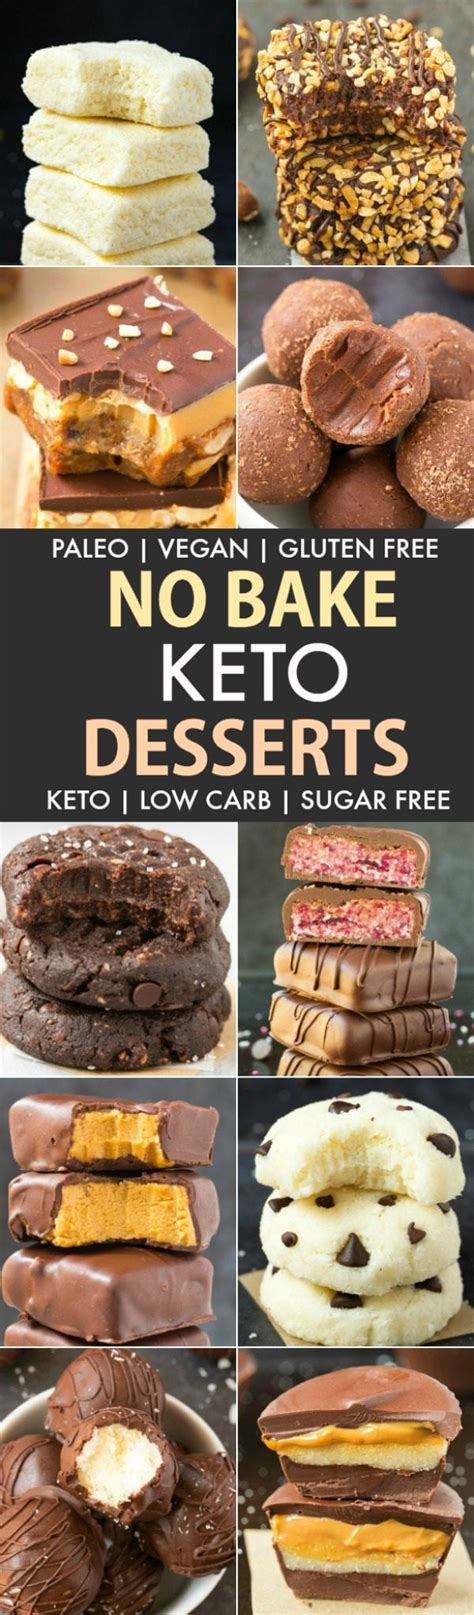 They are topped with a cream cheese frosting and fresh berries. Easy No Bake Low Carb Keto Desserts (Paleo, Vegan)